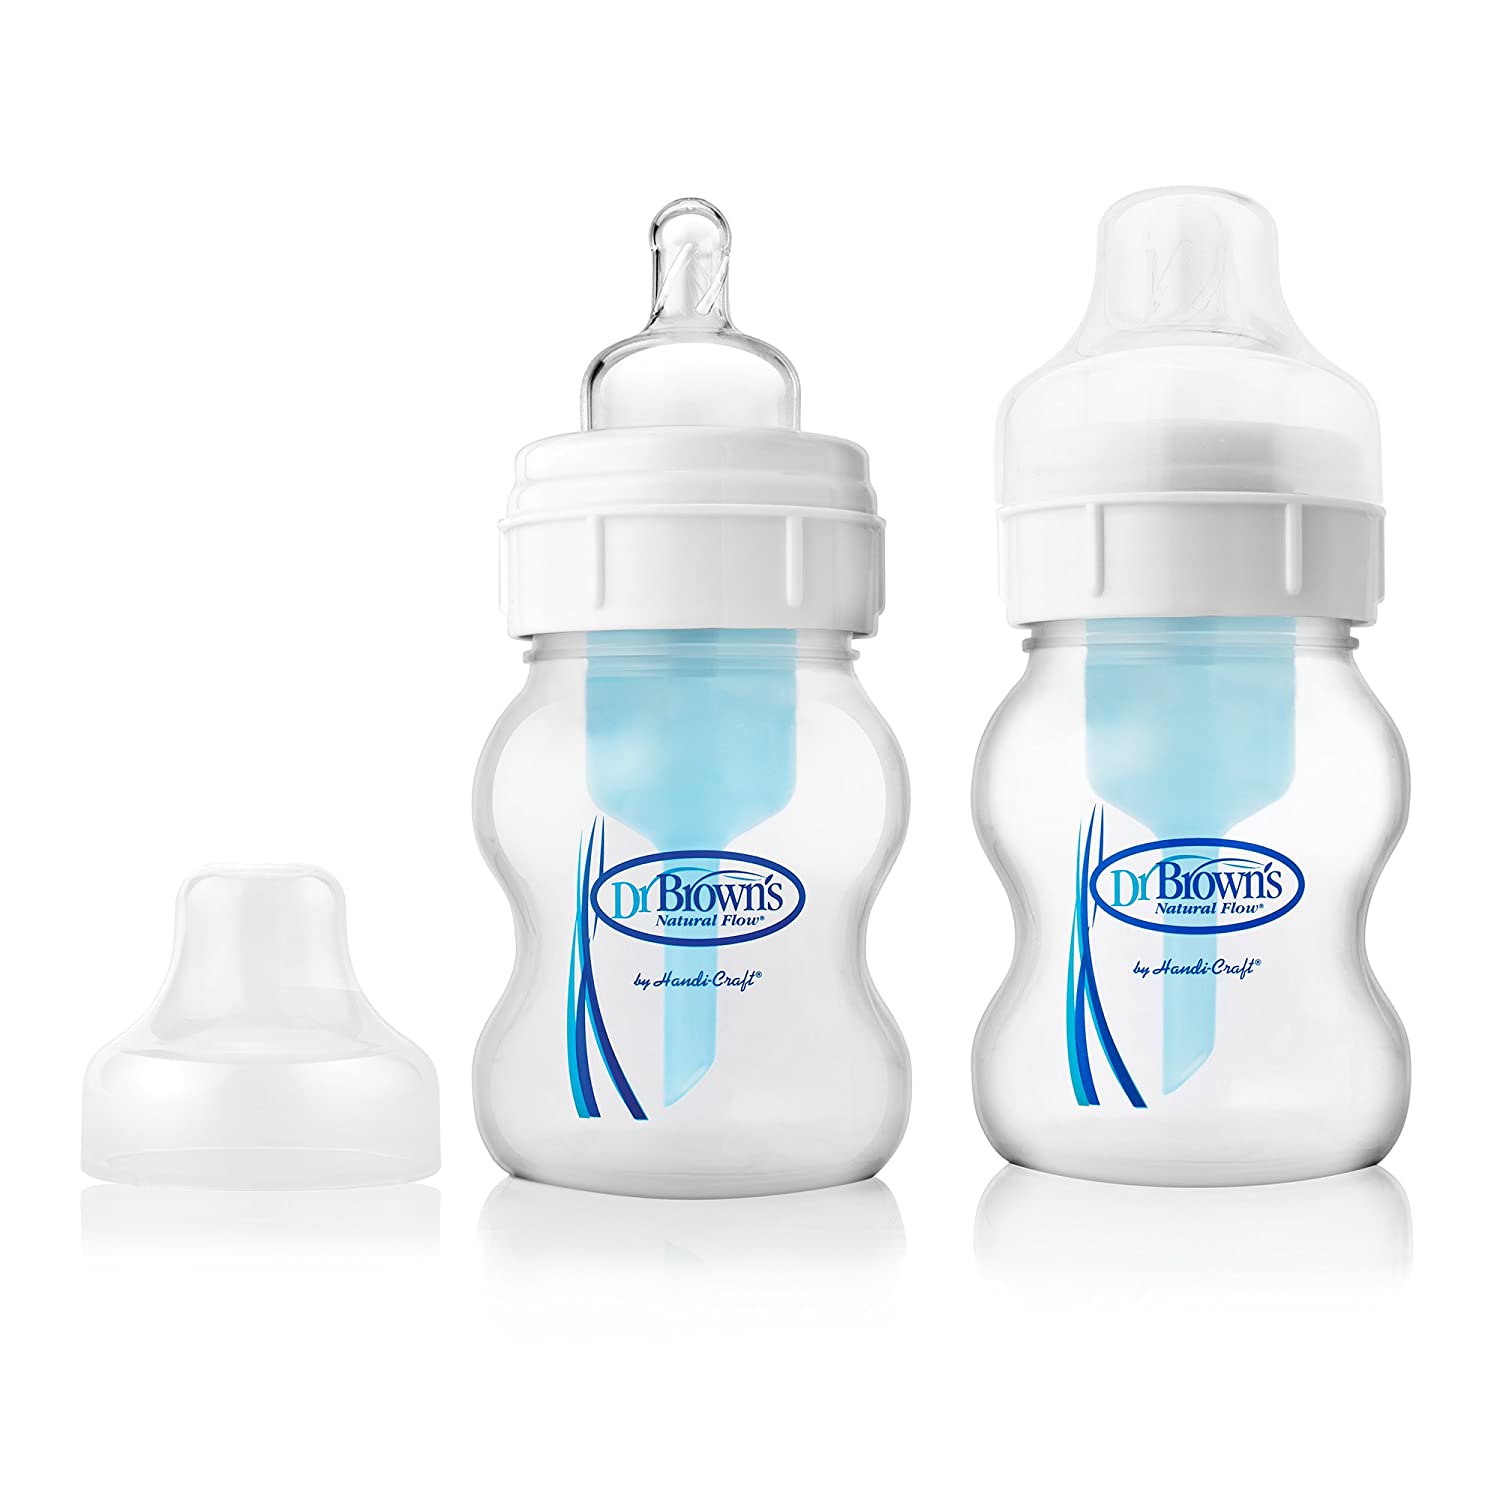 Top 4 Best Natural Baby Bottles Reviews in 2023 4